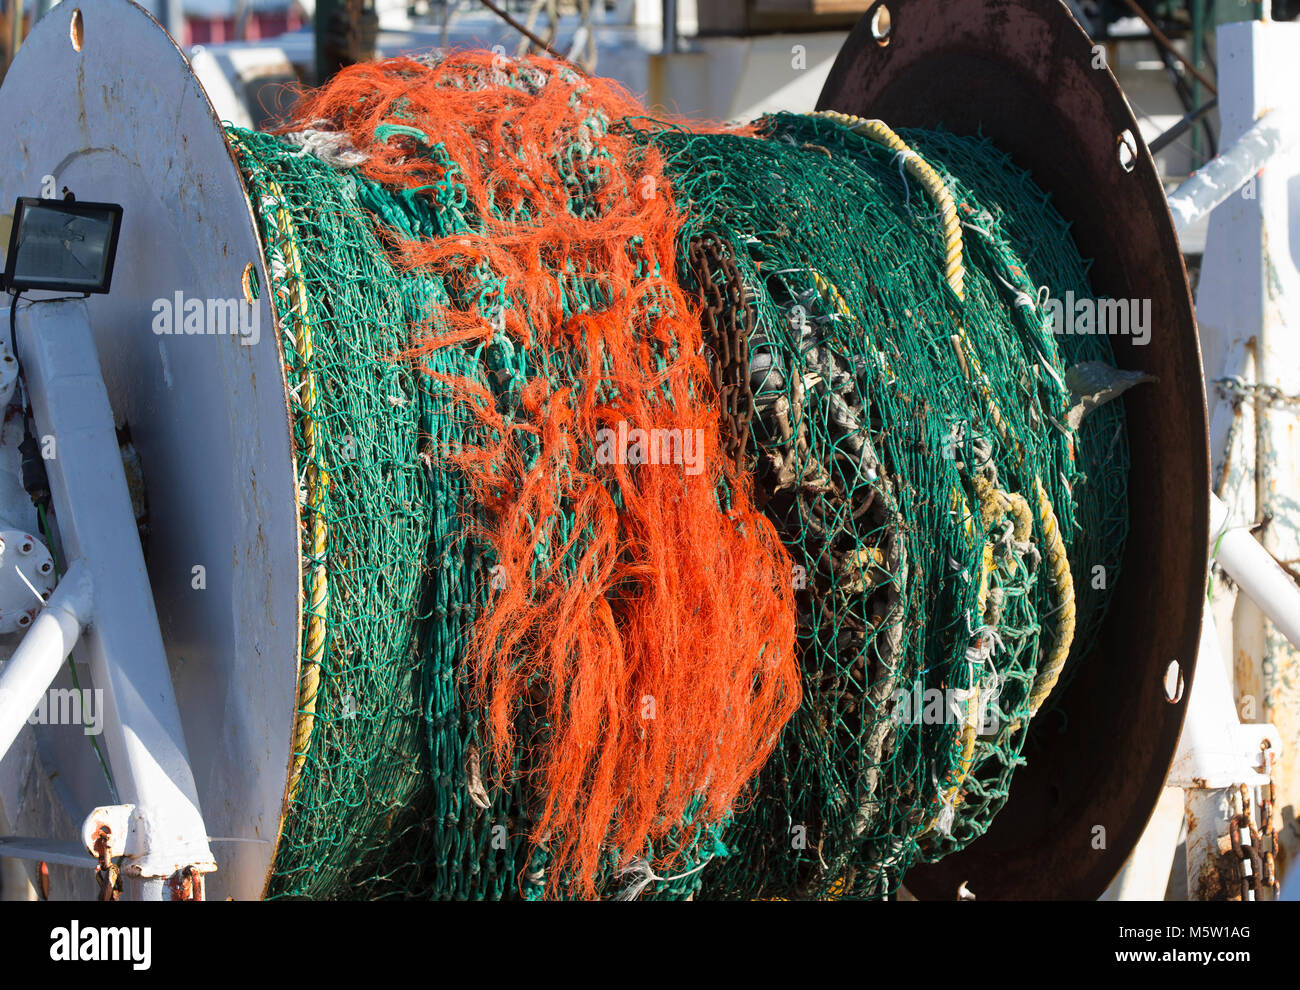 https://c8.alamy.com/comp/M5W1AG/fish-nets-on-a-reel-on-the-stern-of-a-fishing-trawler-in-new-bedford-M5W1AG.jpg